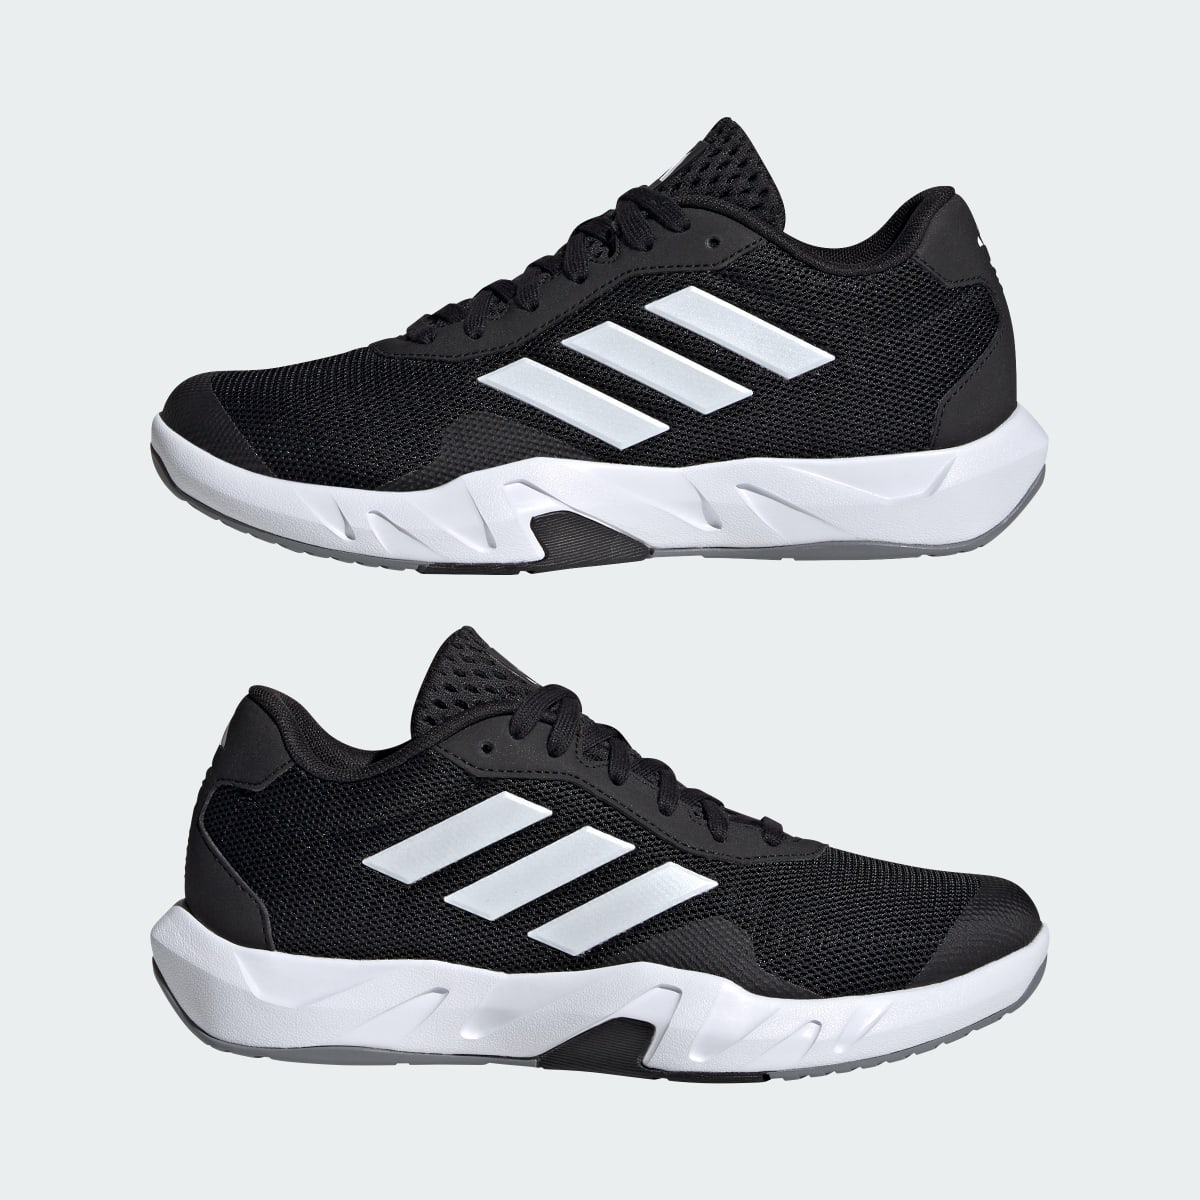 Adidas Amplimove Trainer Shoes. 8